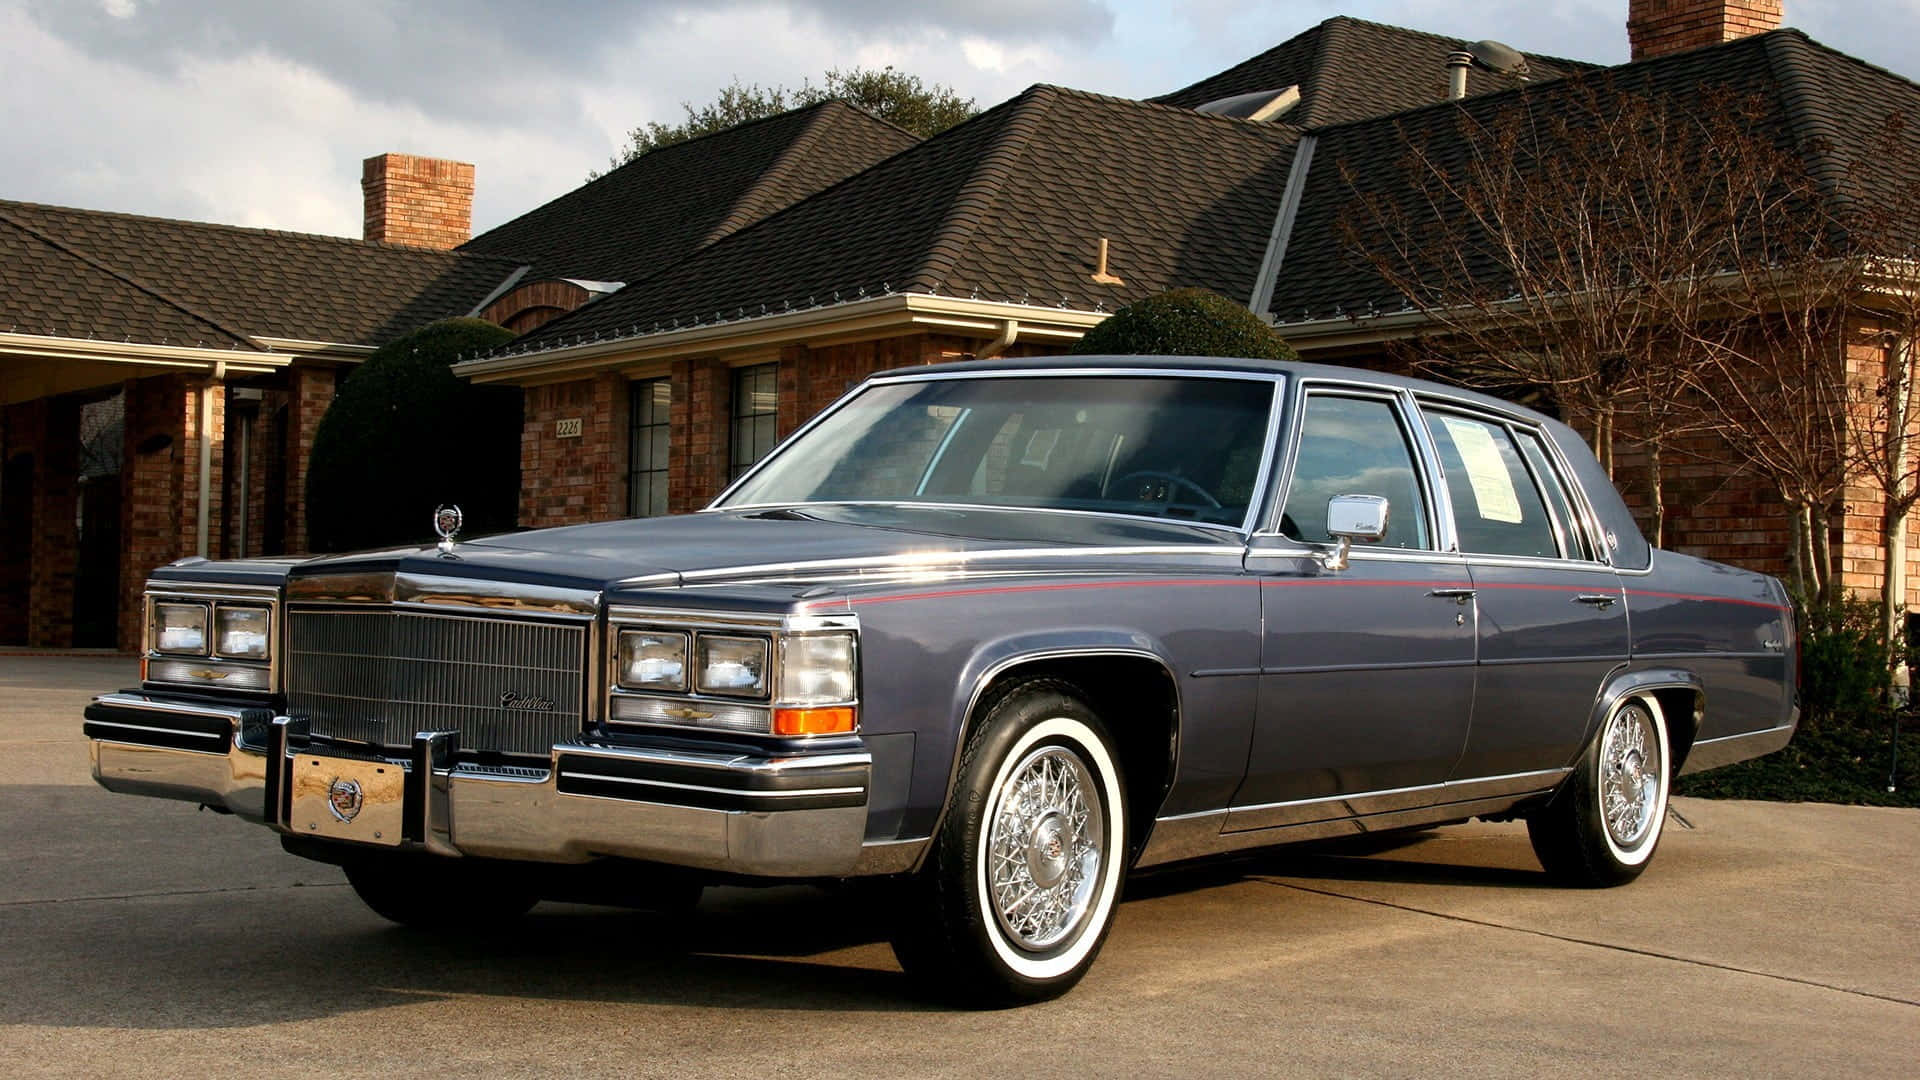 Classic Cadillac Fleetwood in a Vintage Garage Wallpaper